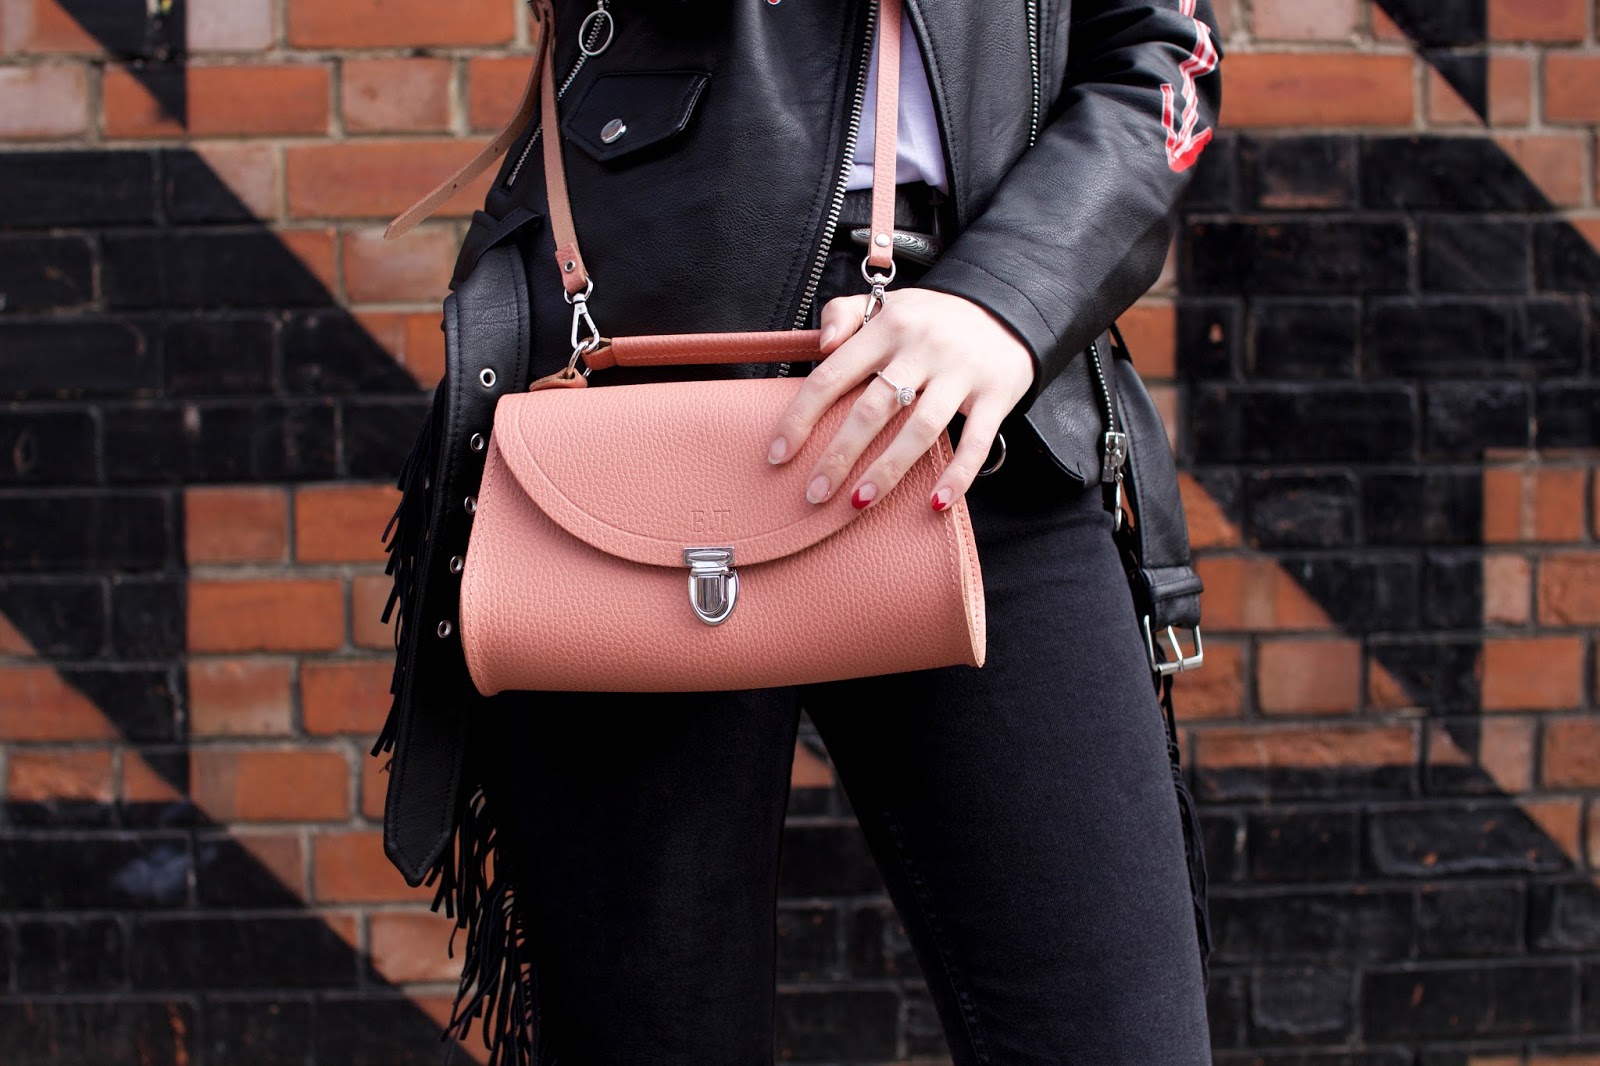 Let's Chat About The Cambridge Satchel Company Poppy Bag! | Cambridge  satchel, Bags, Satchel